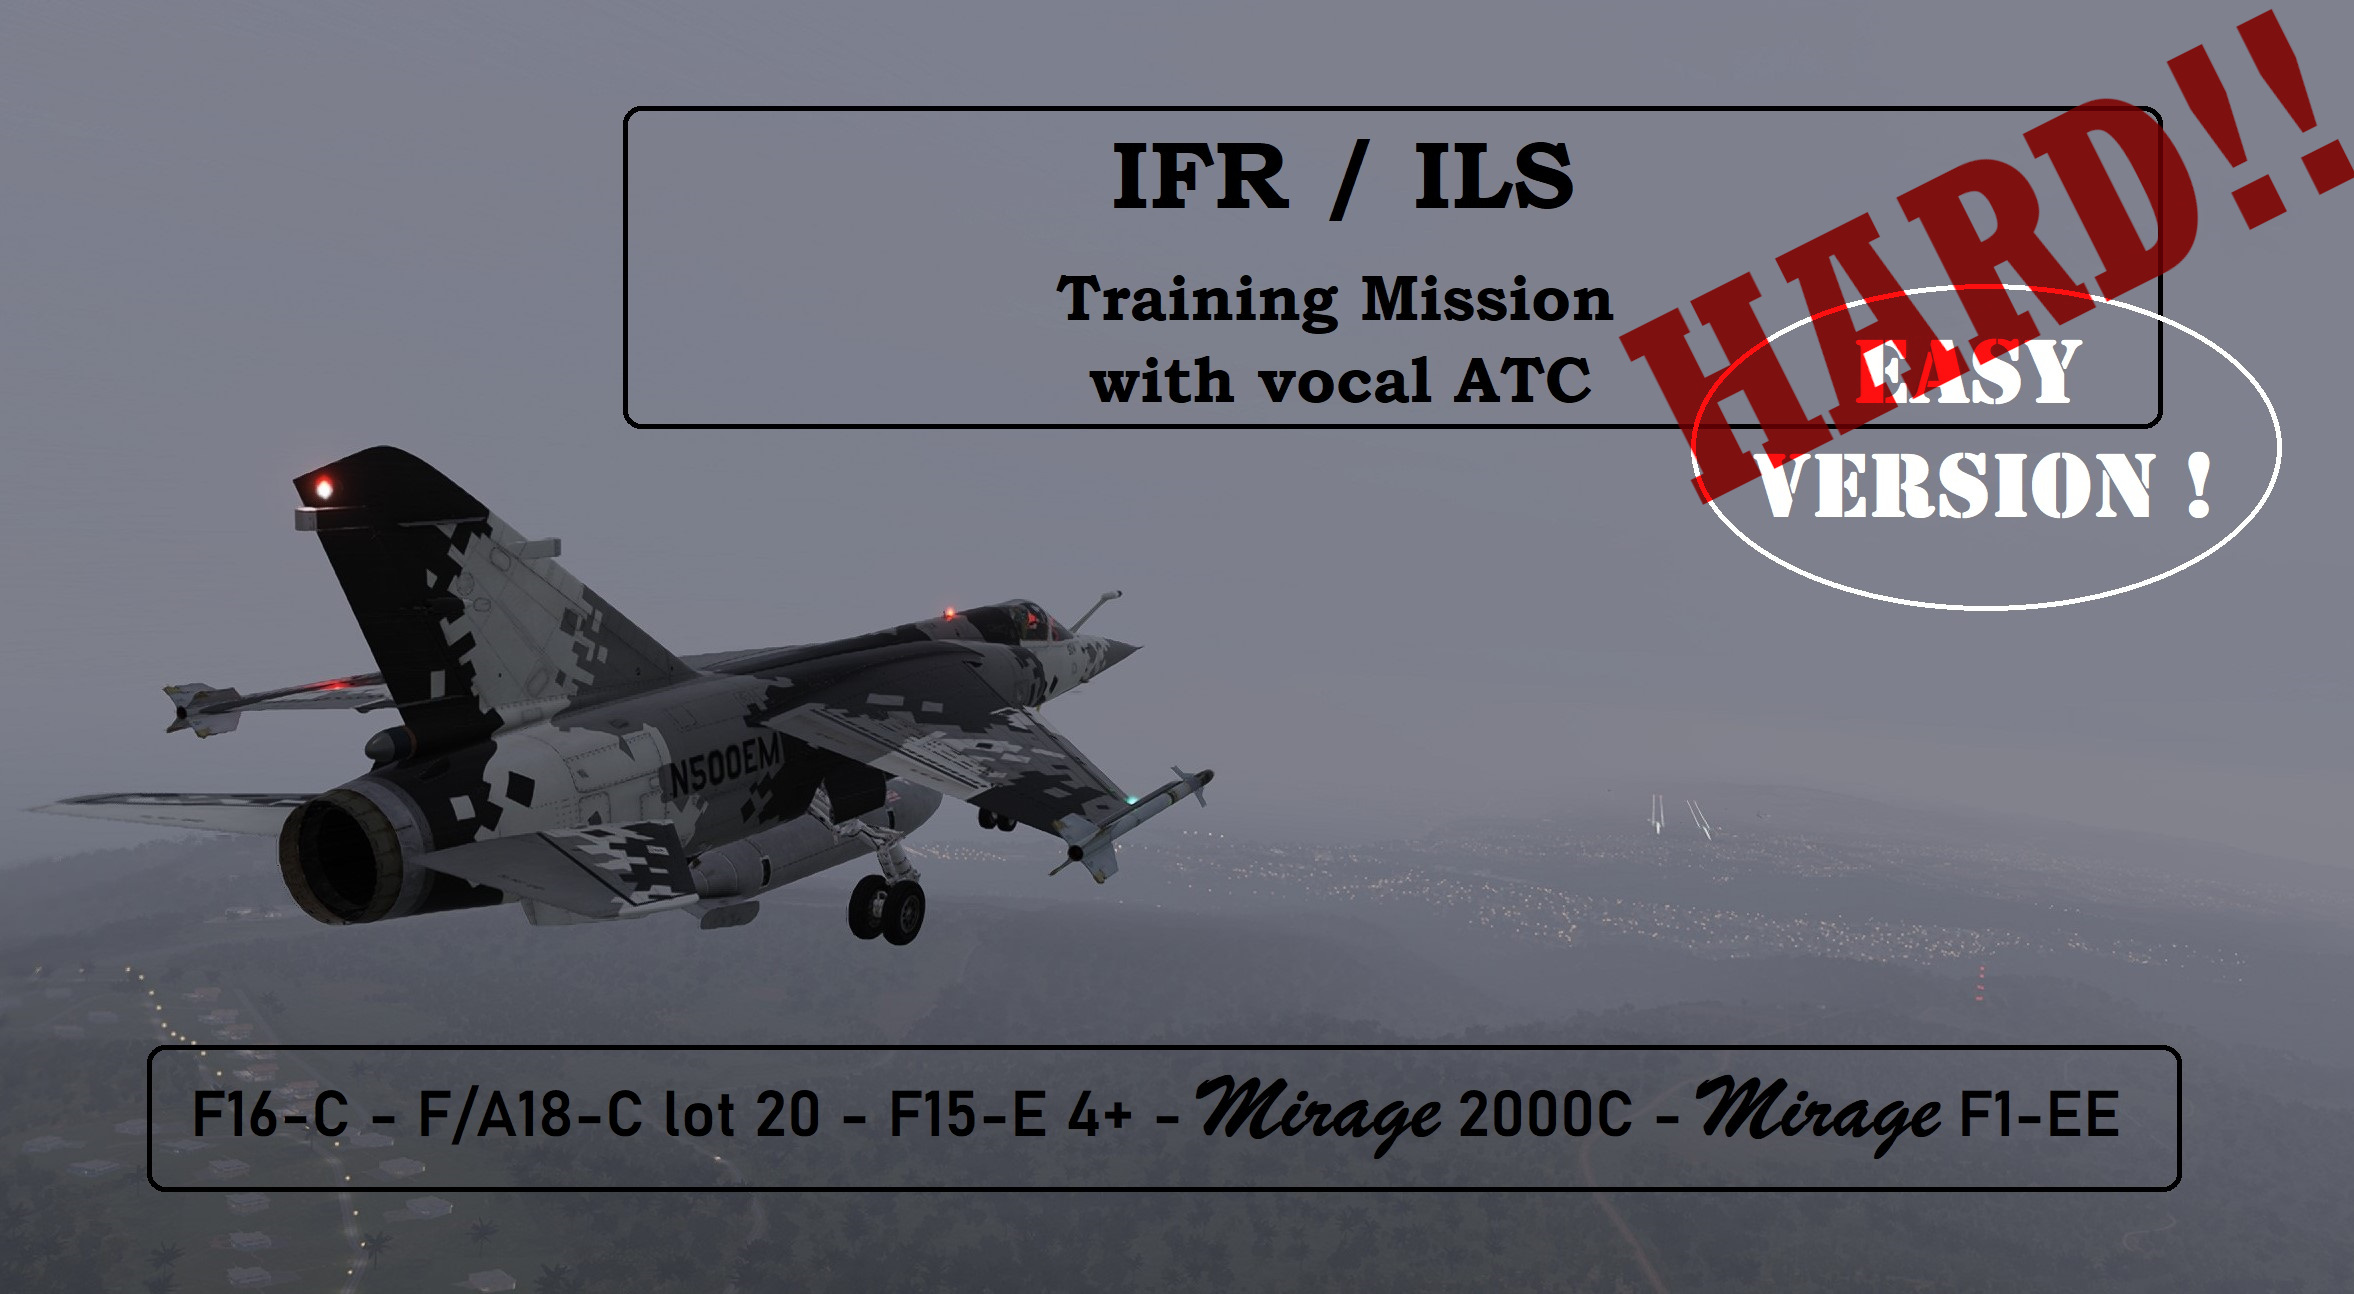 VFR ILS Training Mission over Marianas  SOLO-MULTI HARD VERSION- FOG - NIGHT [F16-C - F15-E - F/A-18C - M2KC - F1-EE]